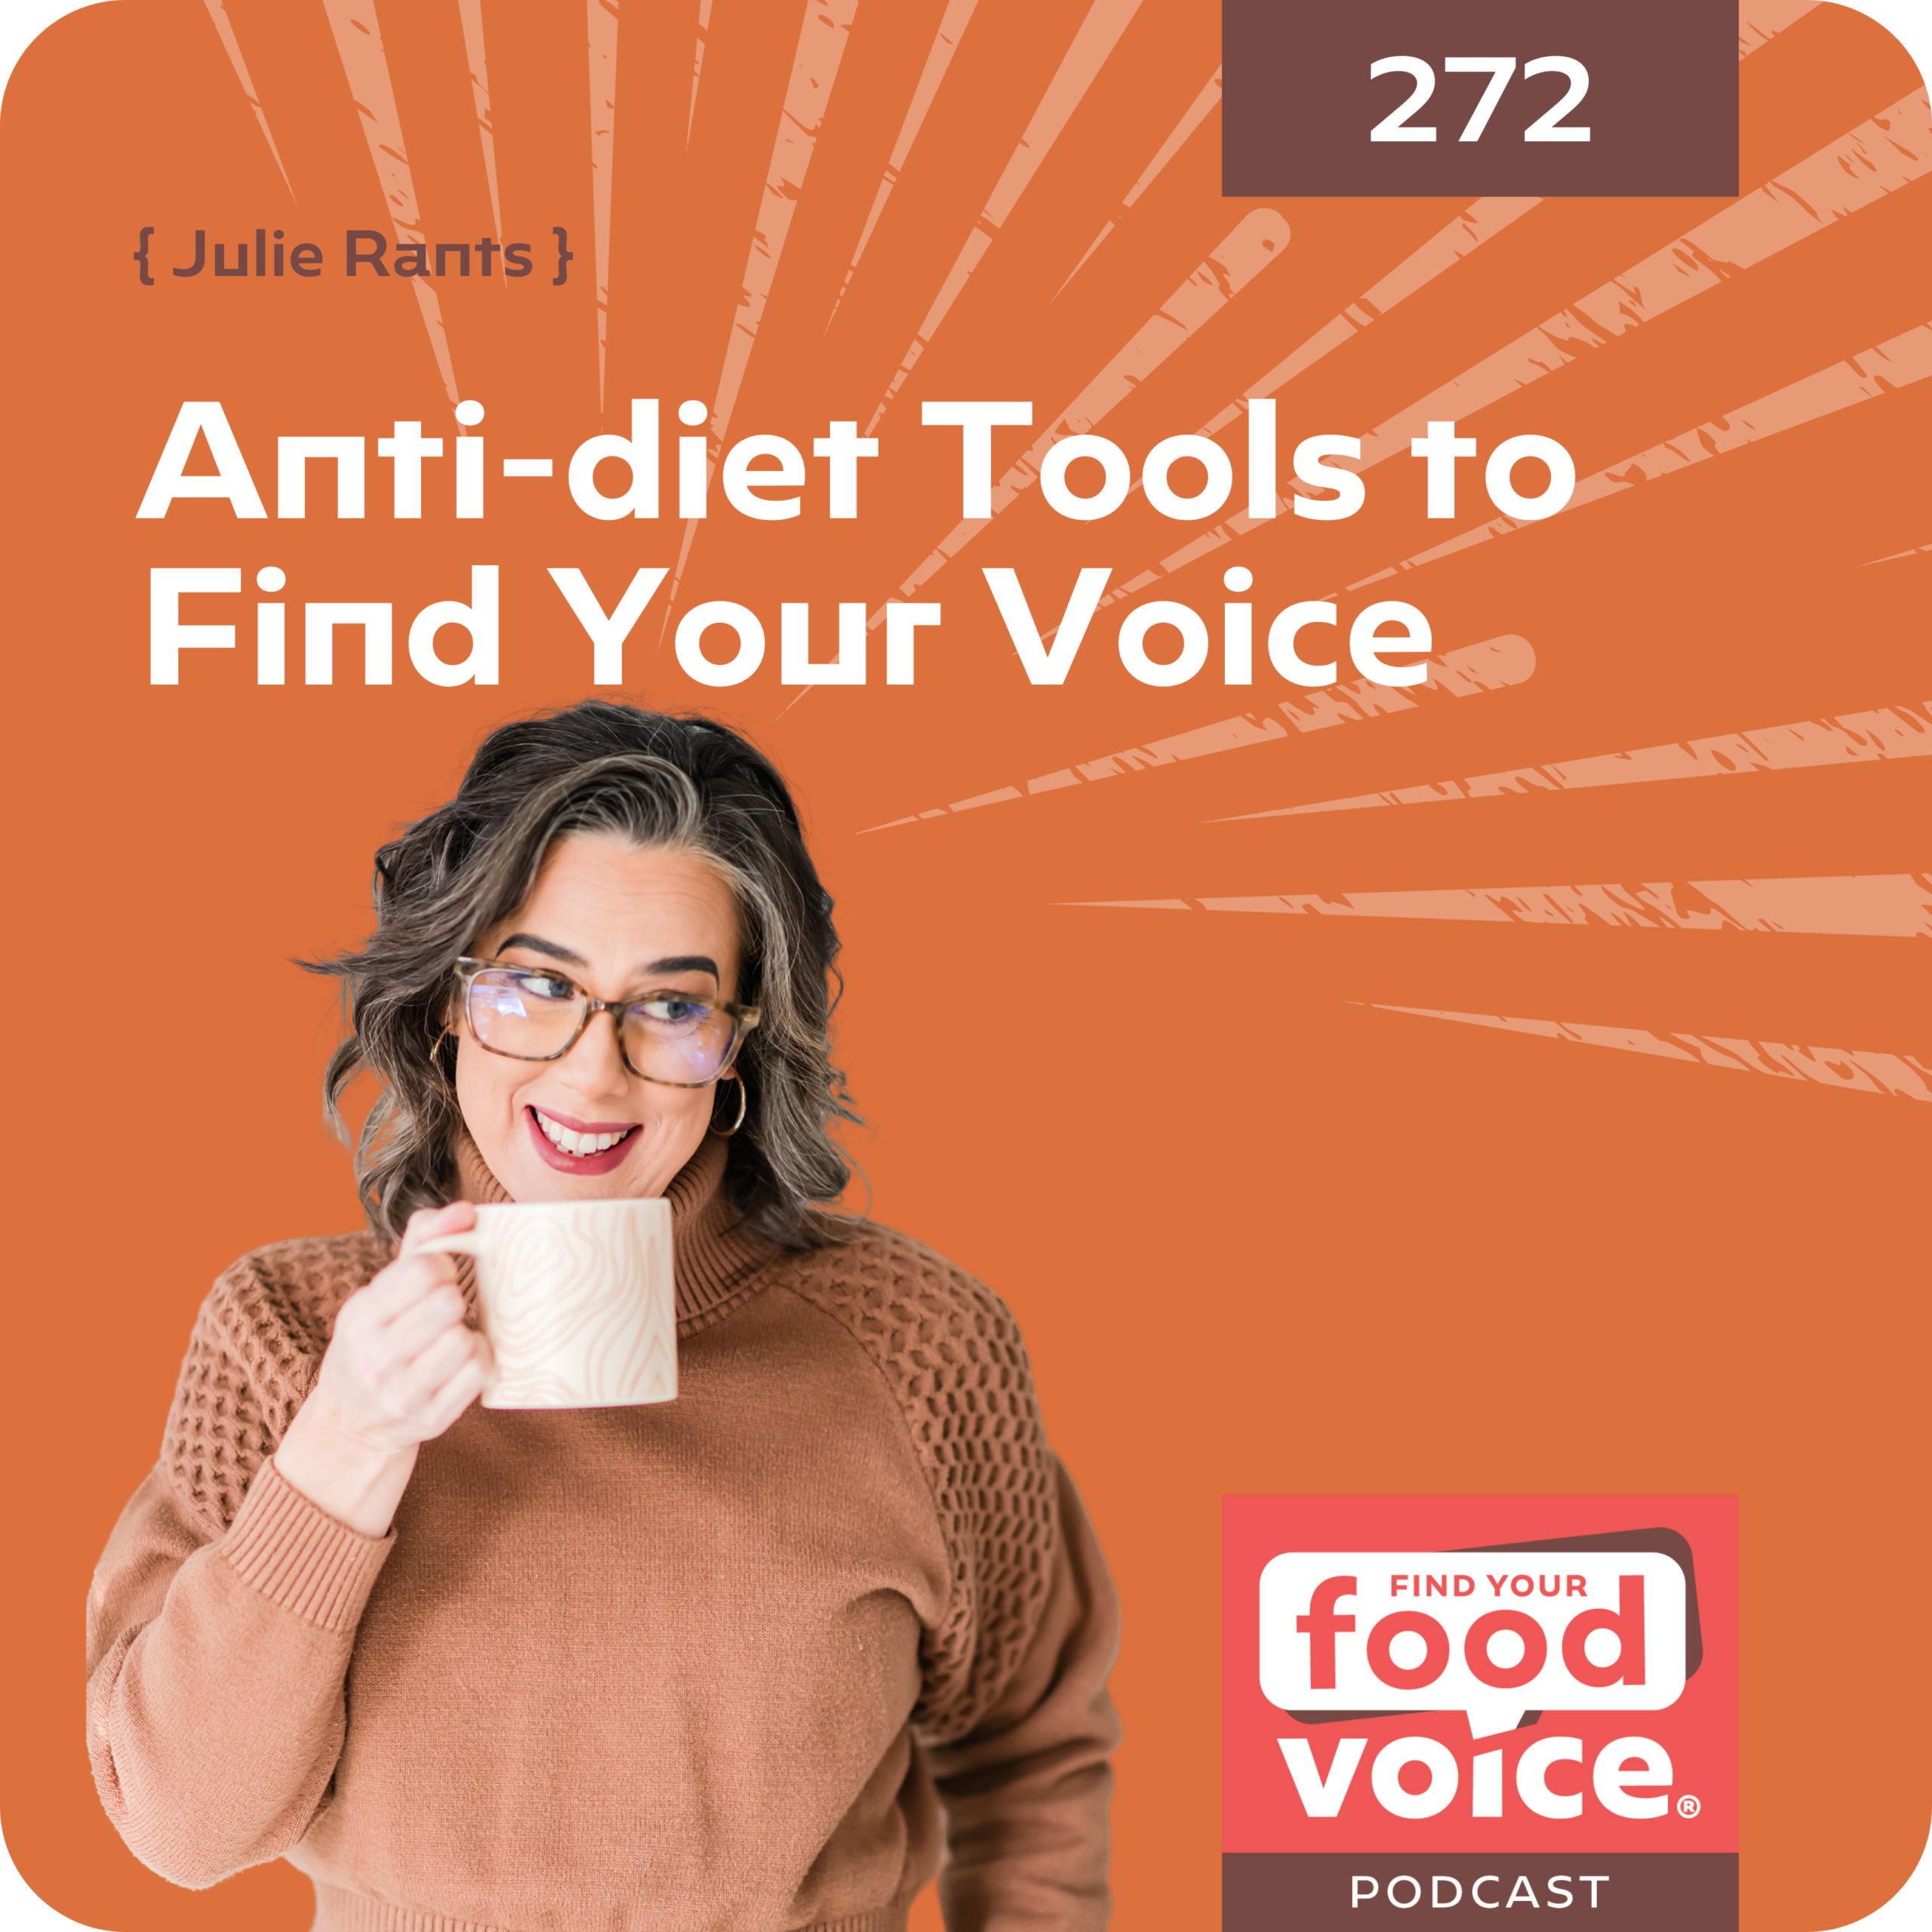 (272) Anti-diet tools help you find your voice